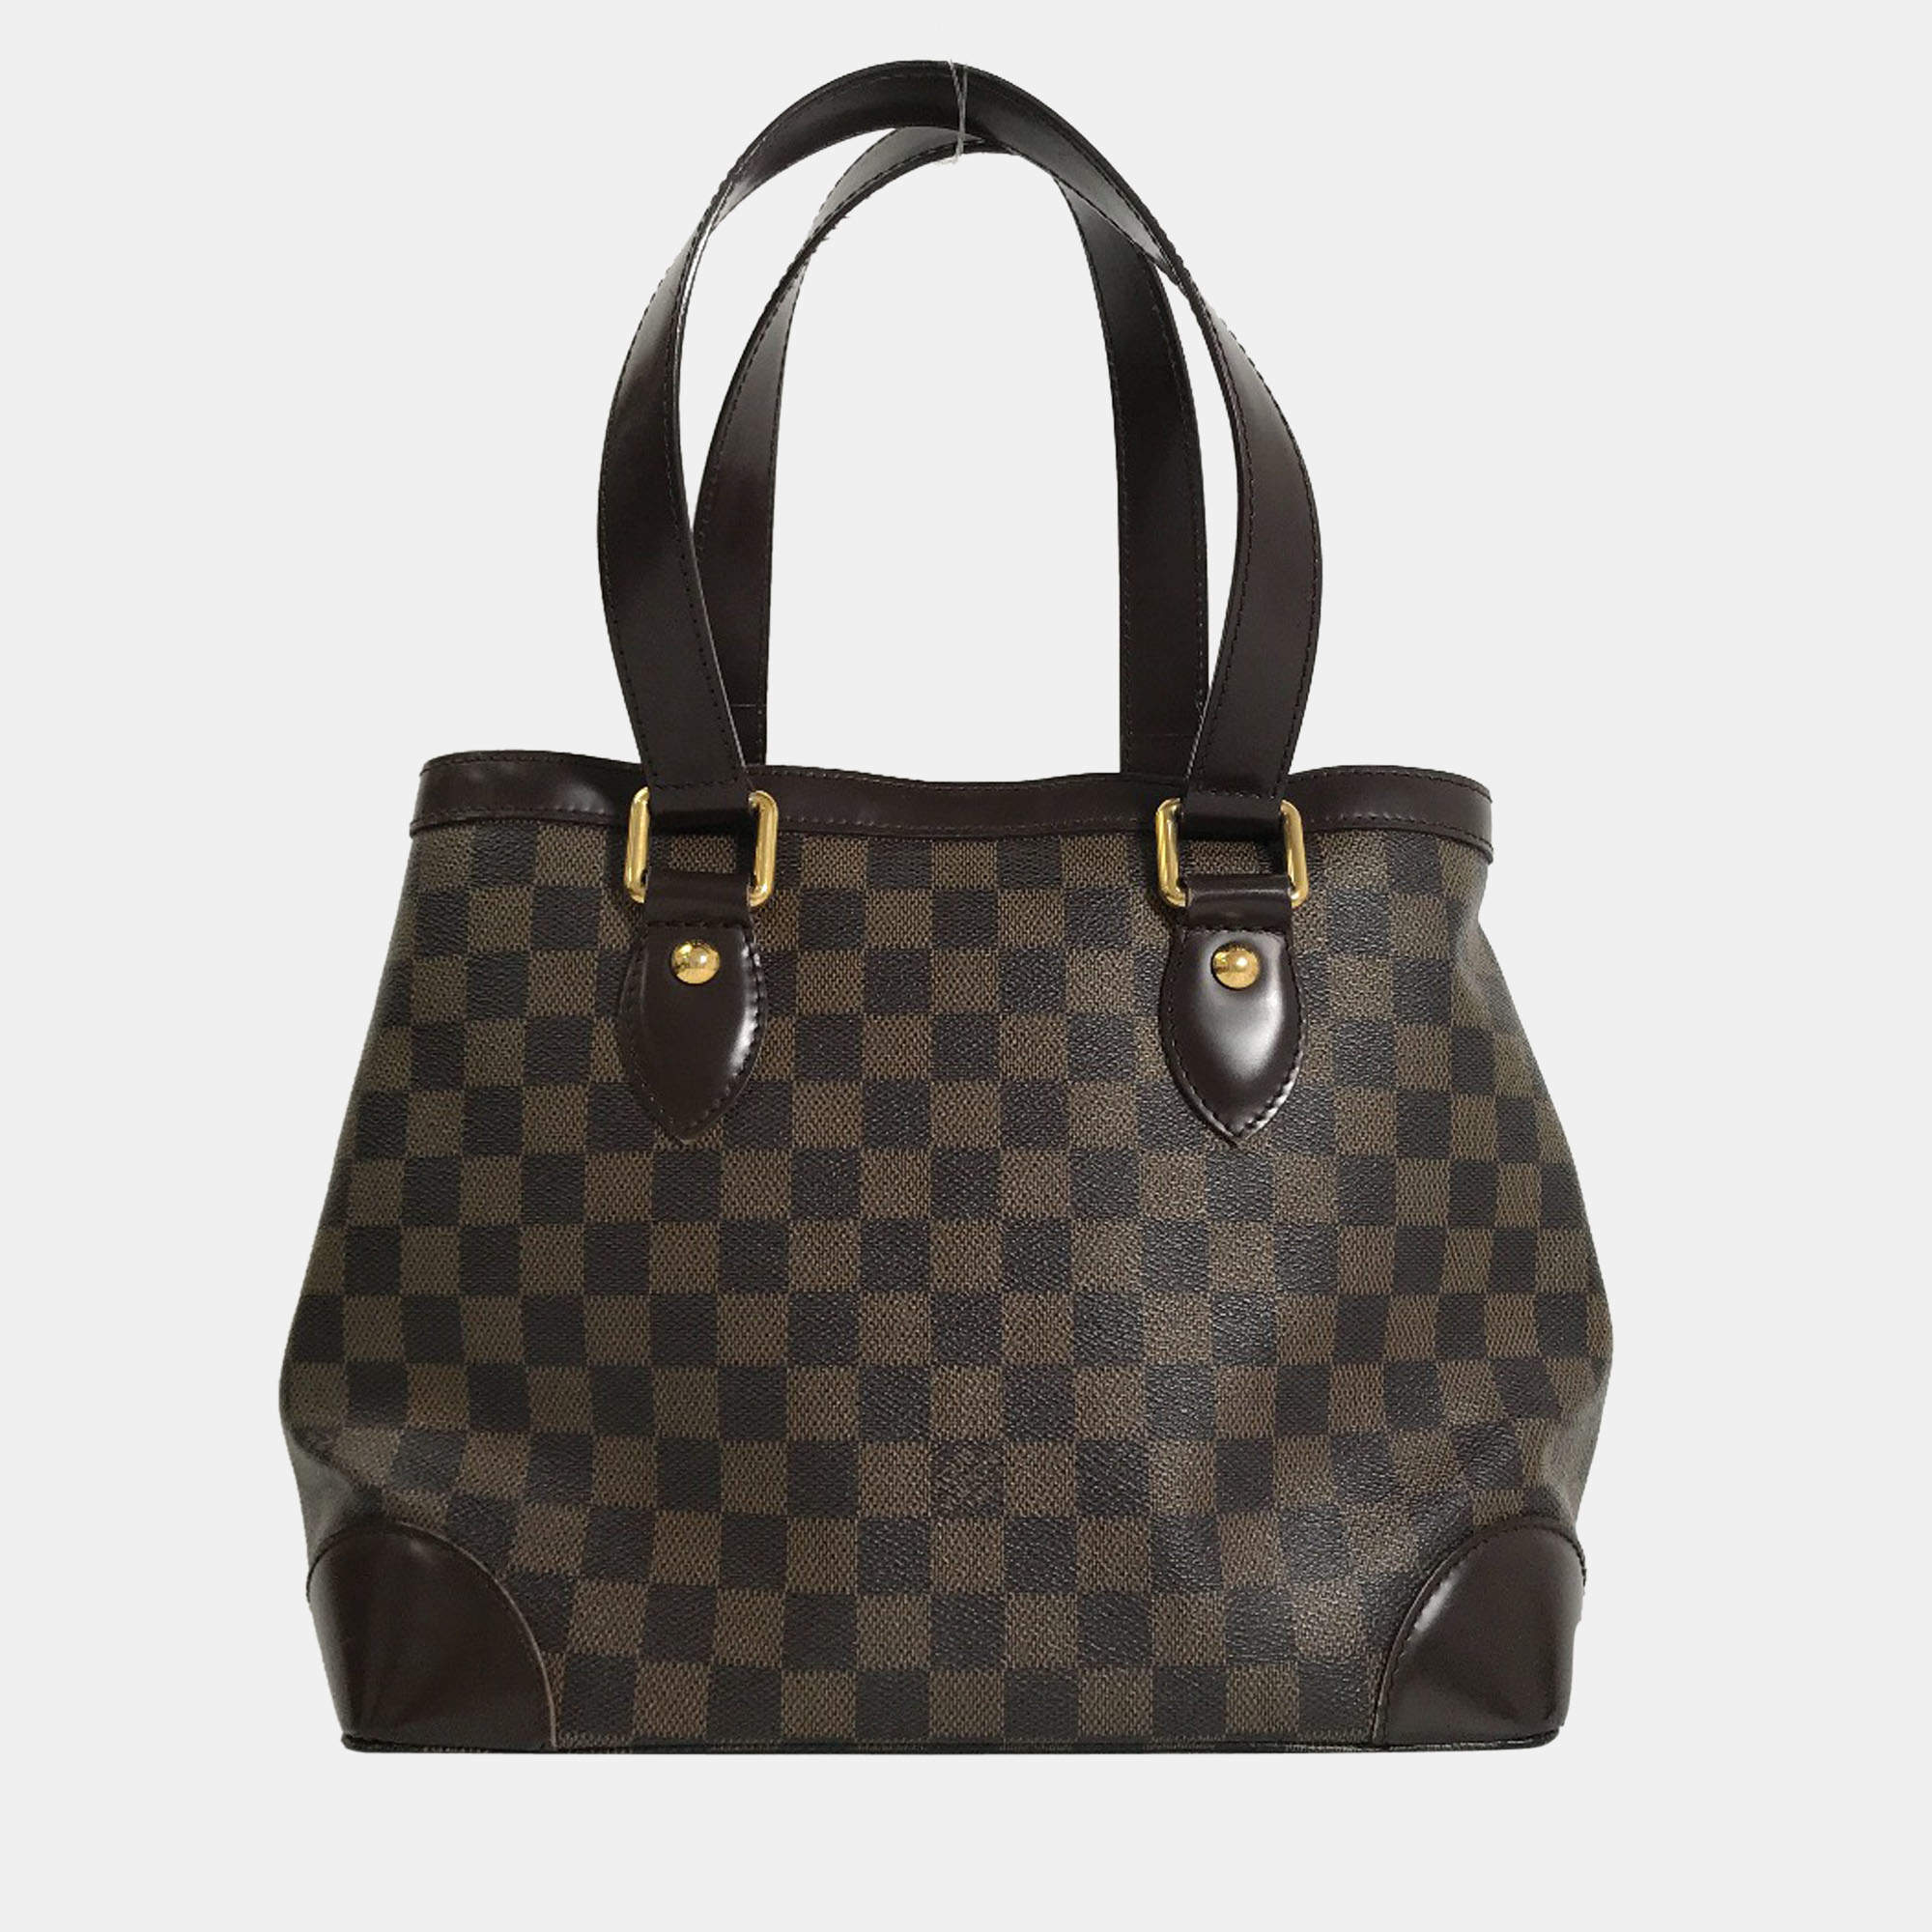 Louis Vuitton Hampstead PM Tote Bag in Brown | Lord & Taylor